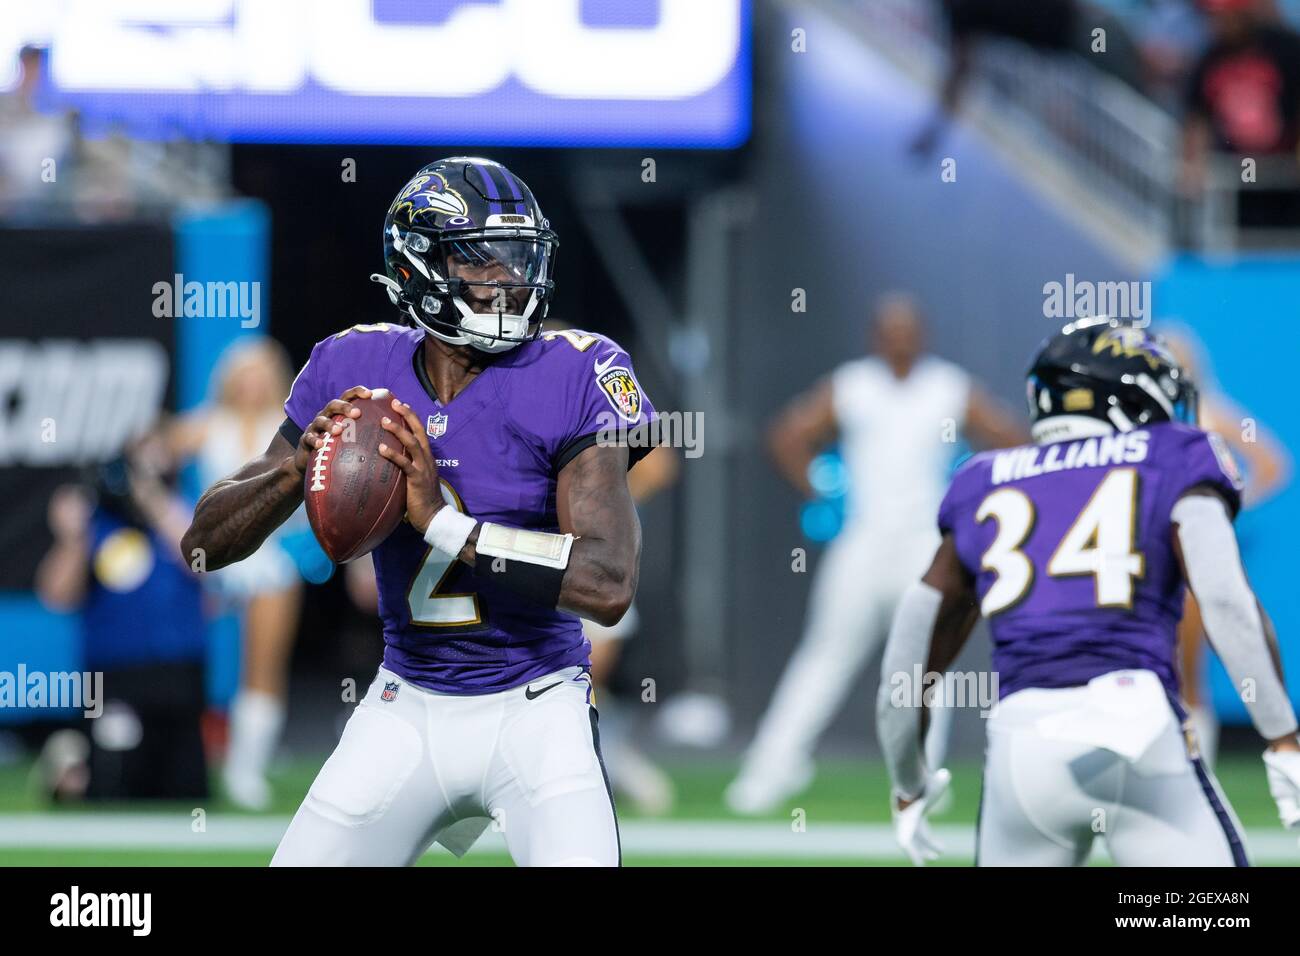 August 21, 2021: Baltimore Ravens quarterback Tyler Huntley (2) looks to throw against the Carolina Panthers in the NFL matchup at Bank of America Stadium in Charlotte, NC. (Scott Kinser/Cal Sport Media) Stock Photo